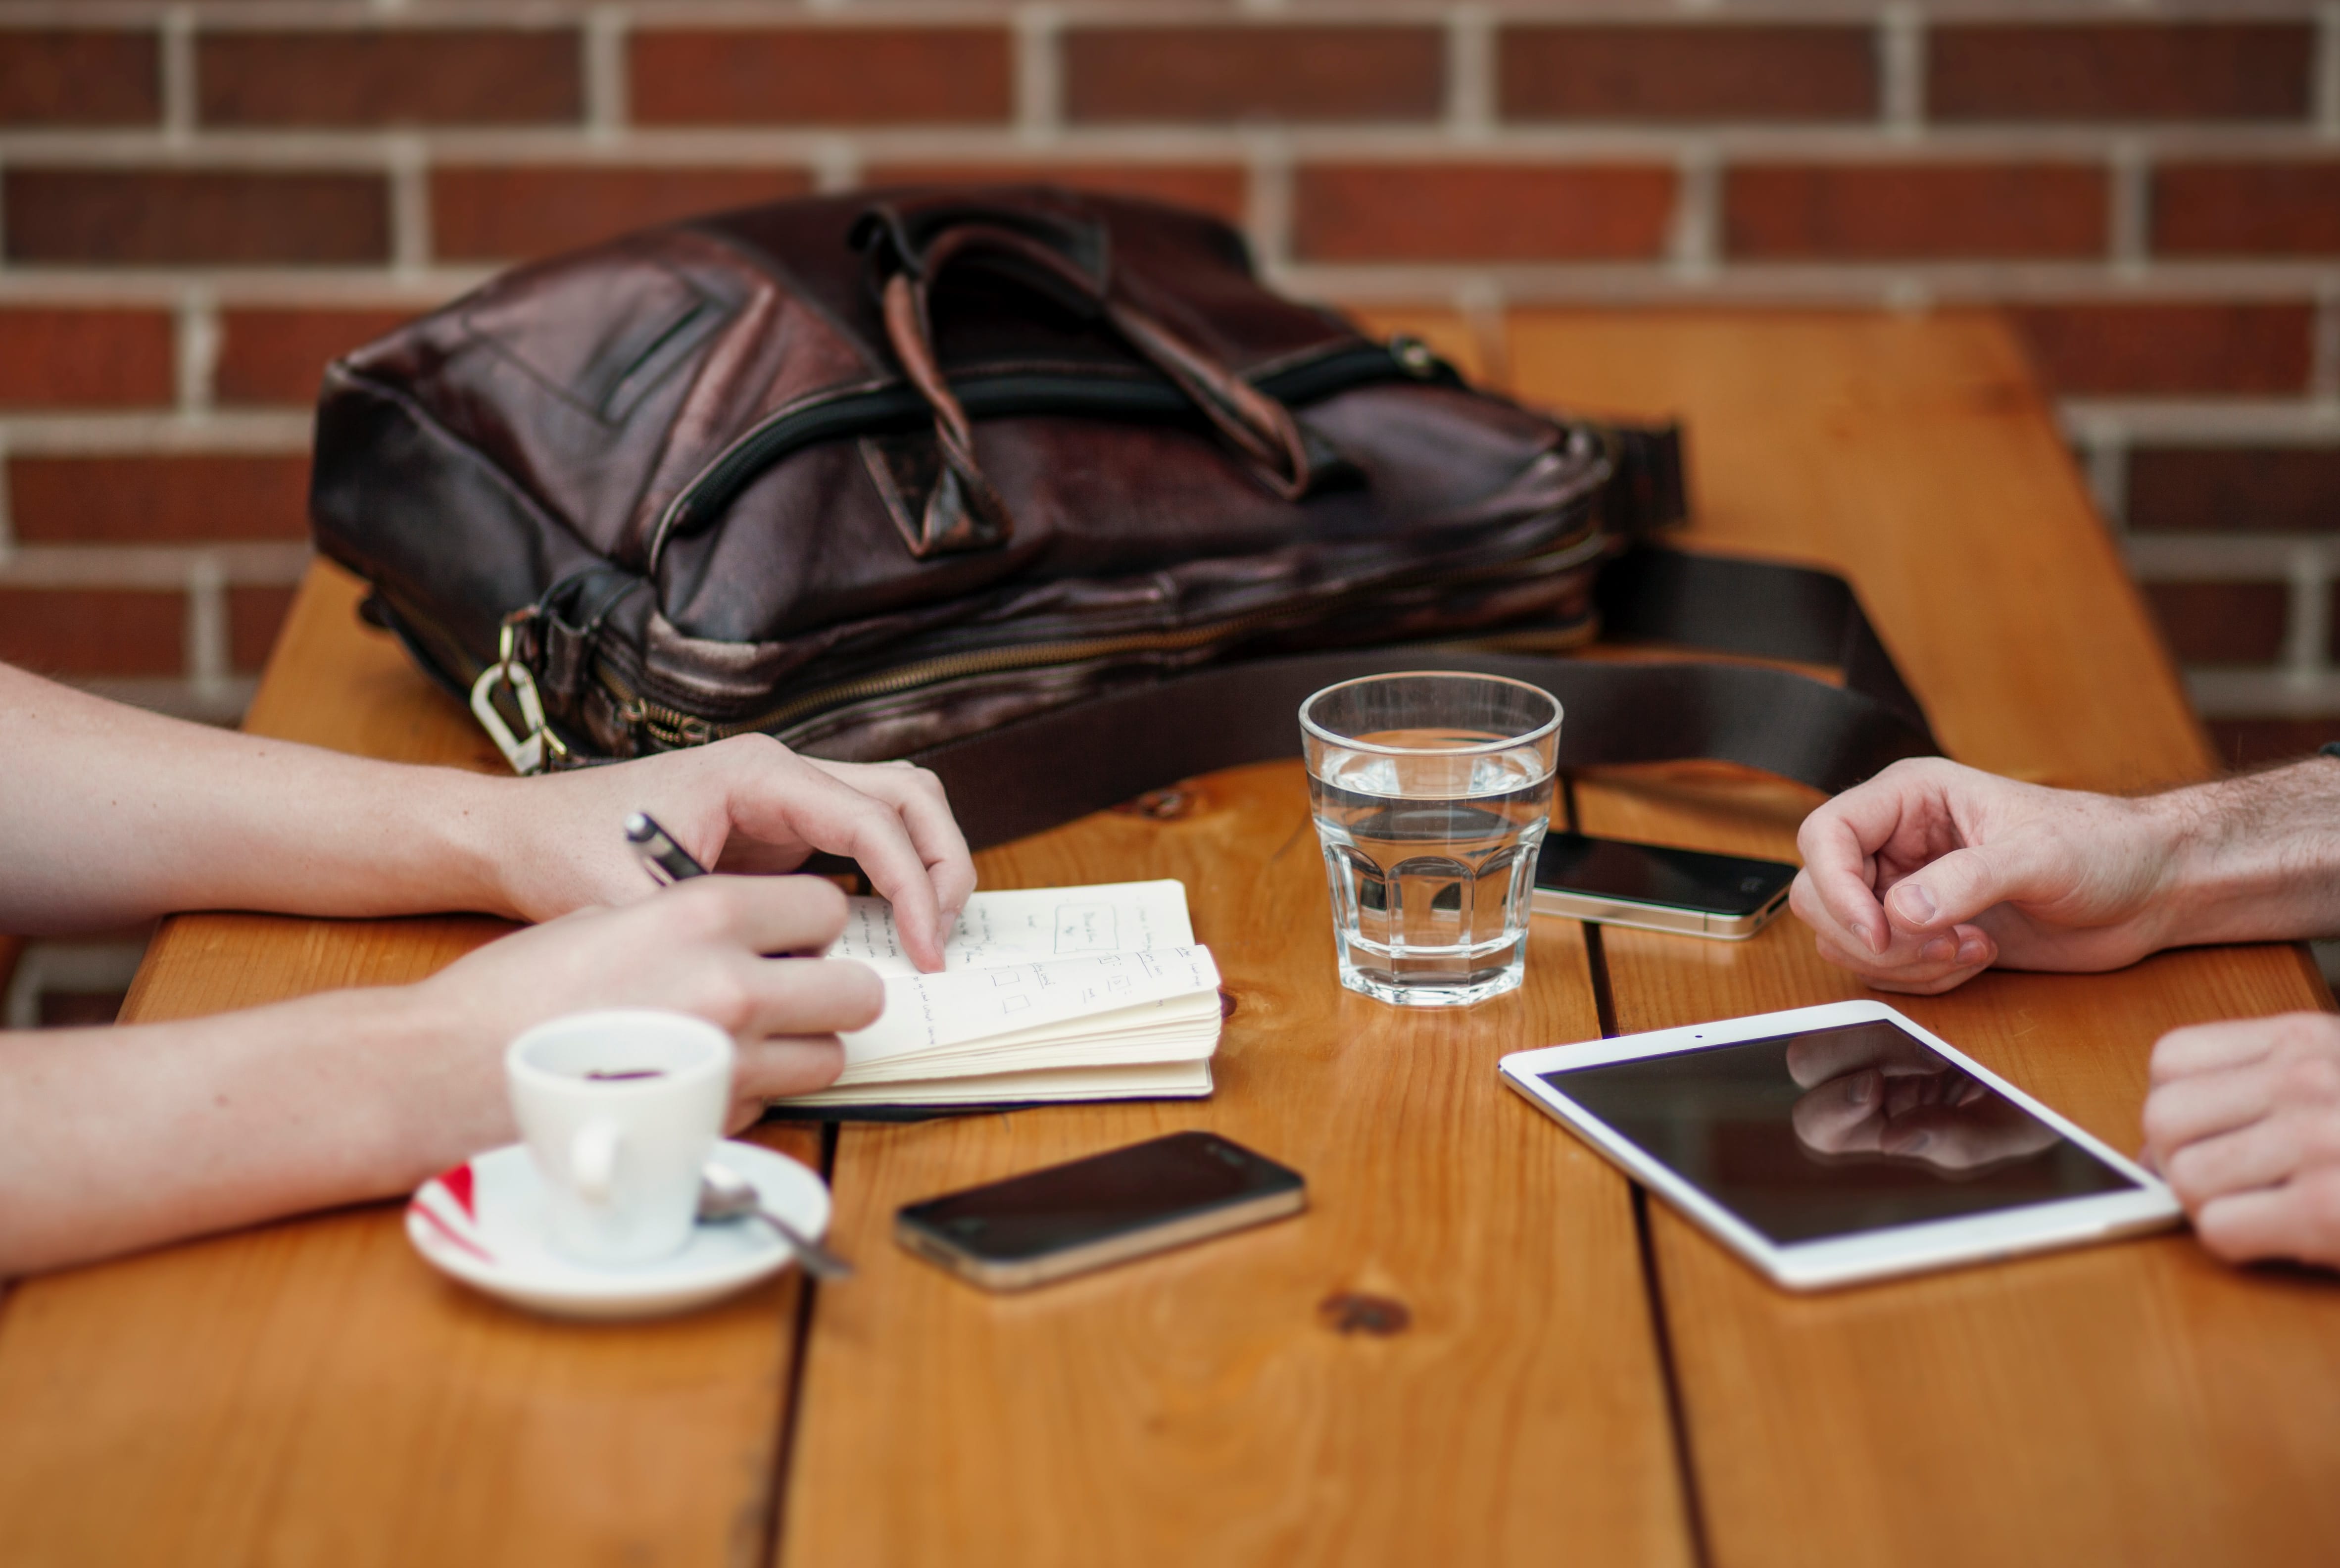 Two people meeting with iphone and ipad; image by Alejandro Escamilla, via Unsplash.com.